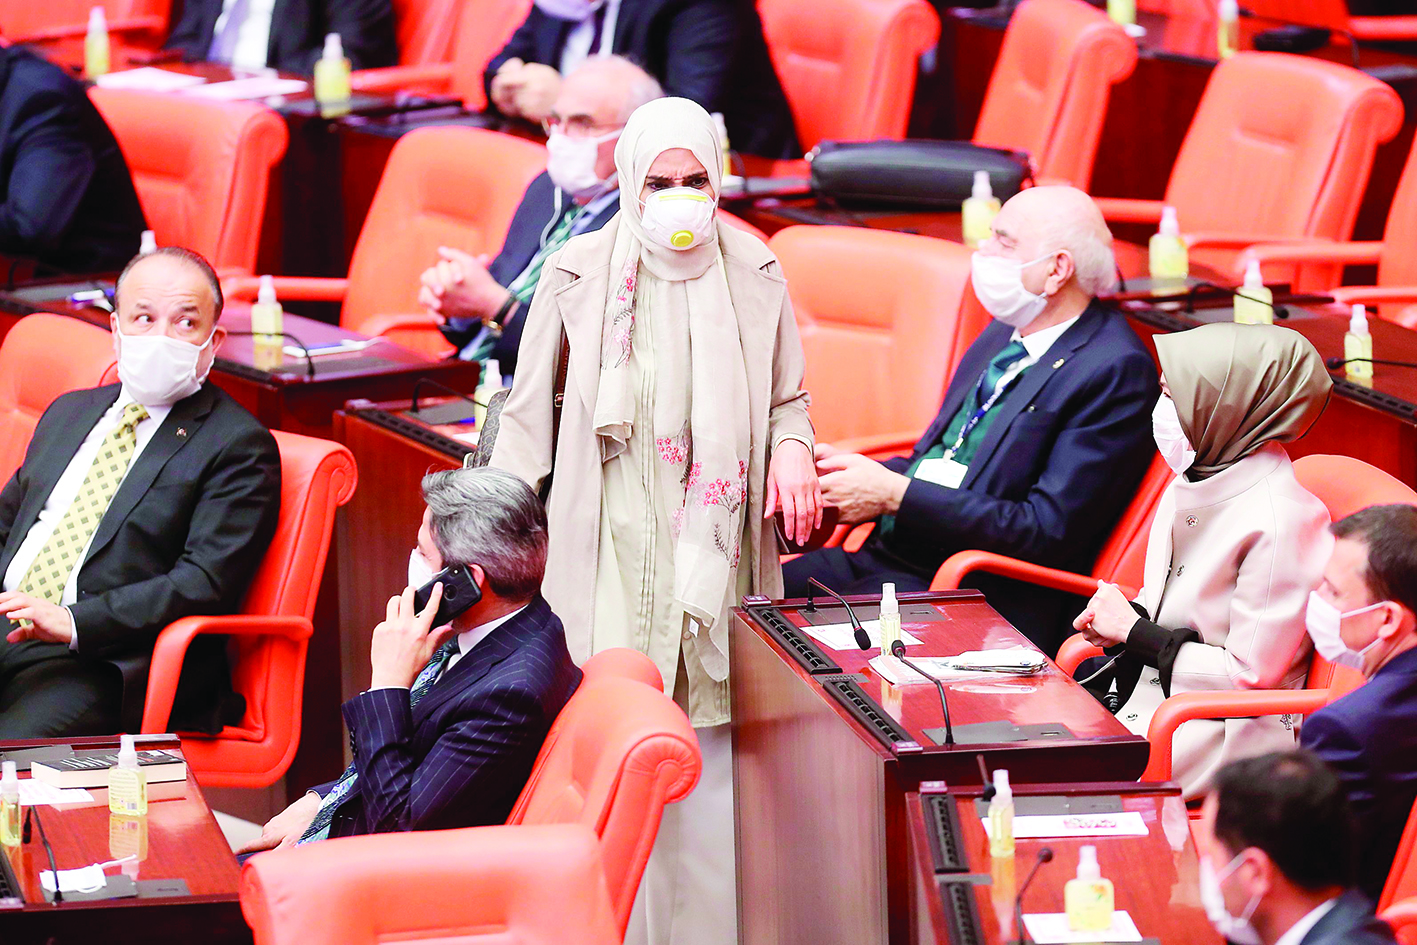 Members of Parliament wearing face masks as a precaution against the novel coronavirus (COVID-19) attend the general assembly meeting of the Grand National Assembly of Turkey (TBMM) in Ankara, Turkey on April 7, 2020. (Photo by Adem ALTAN / AFP)